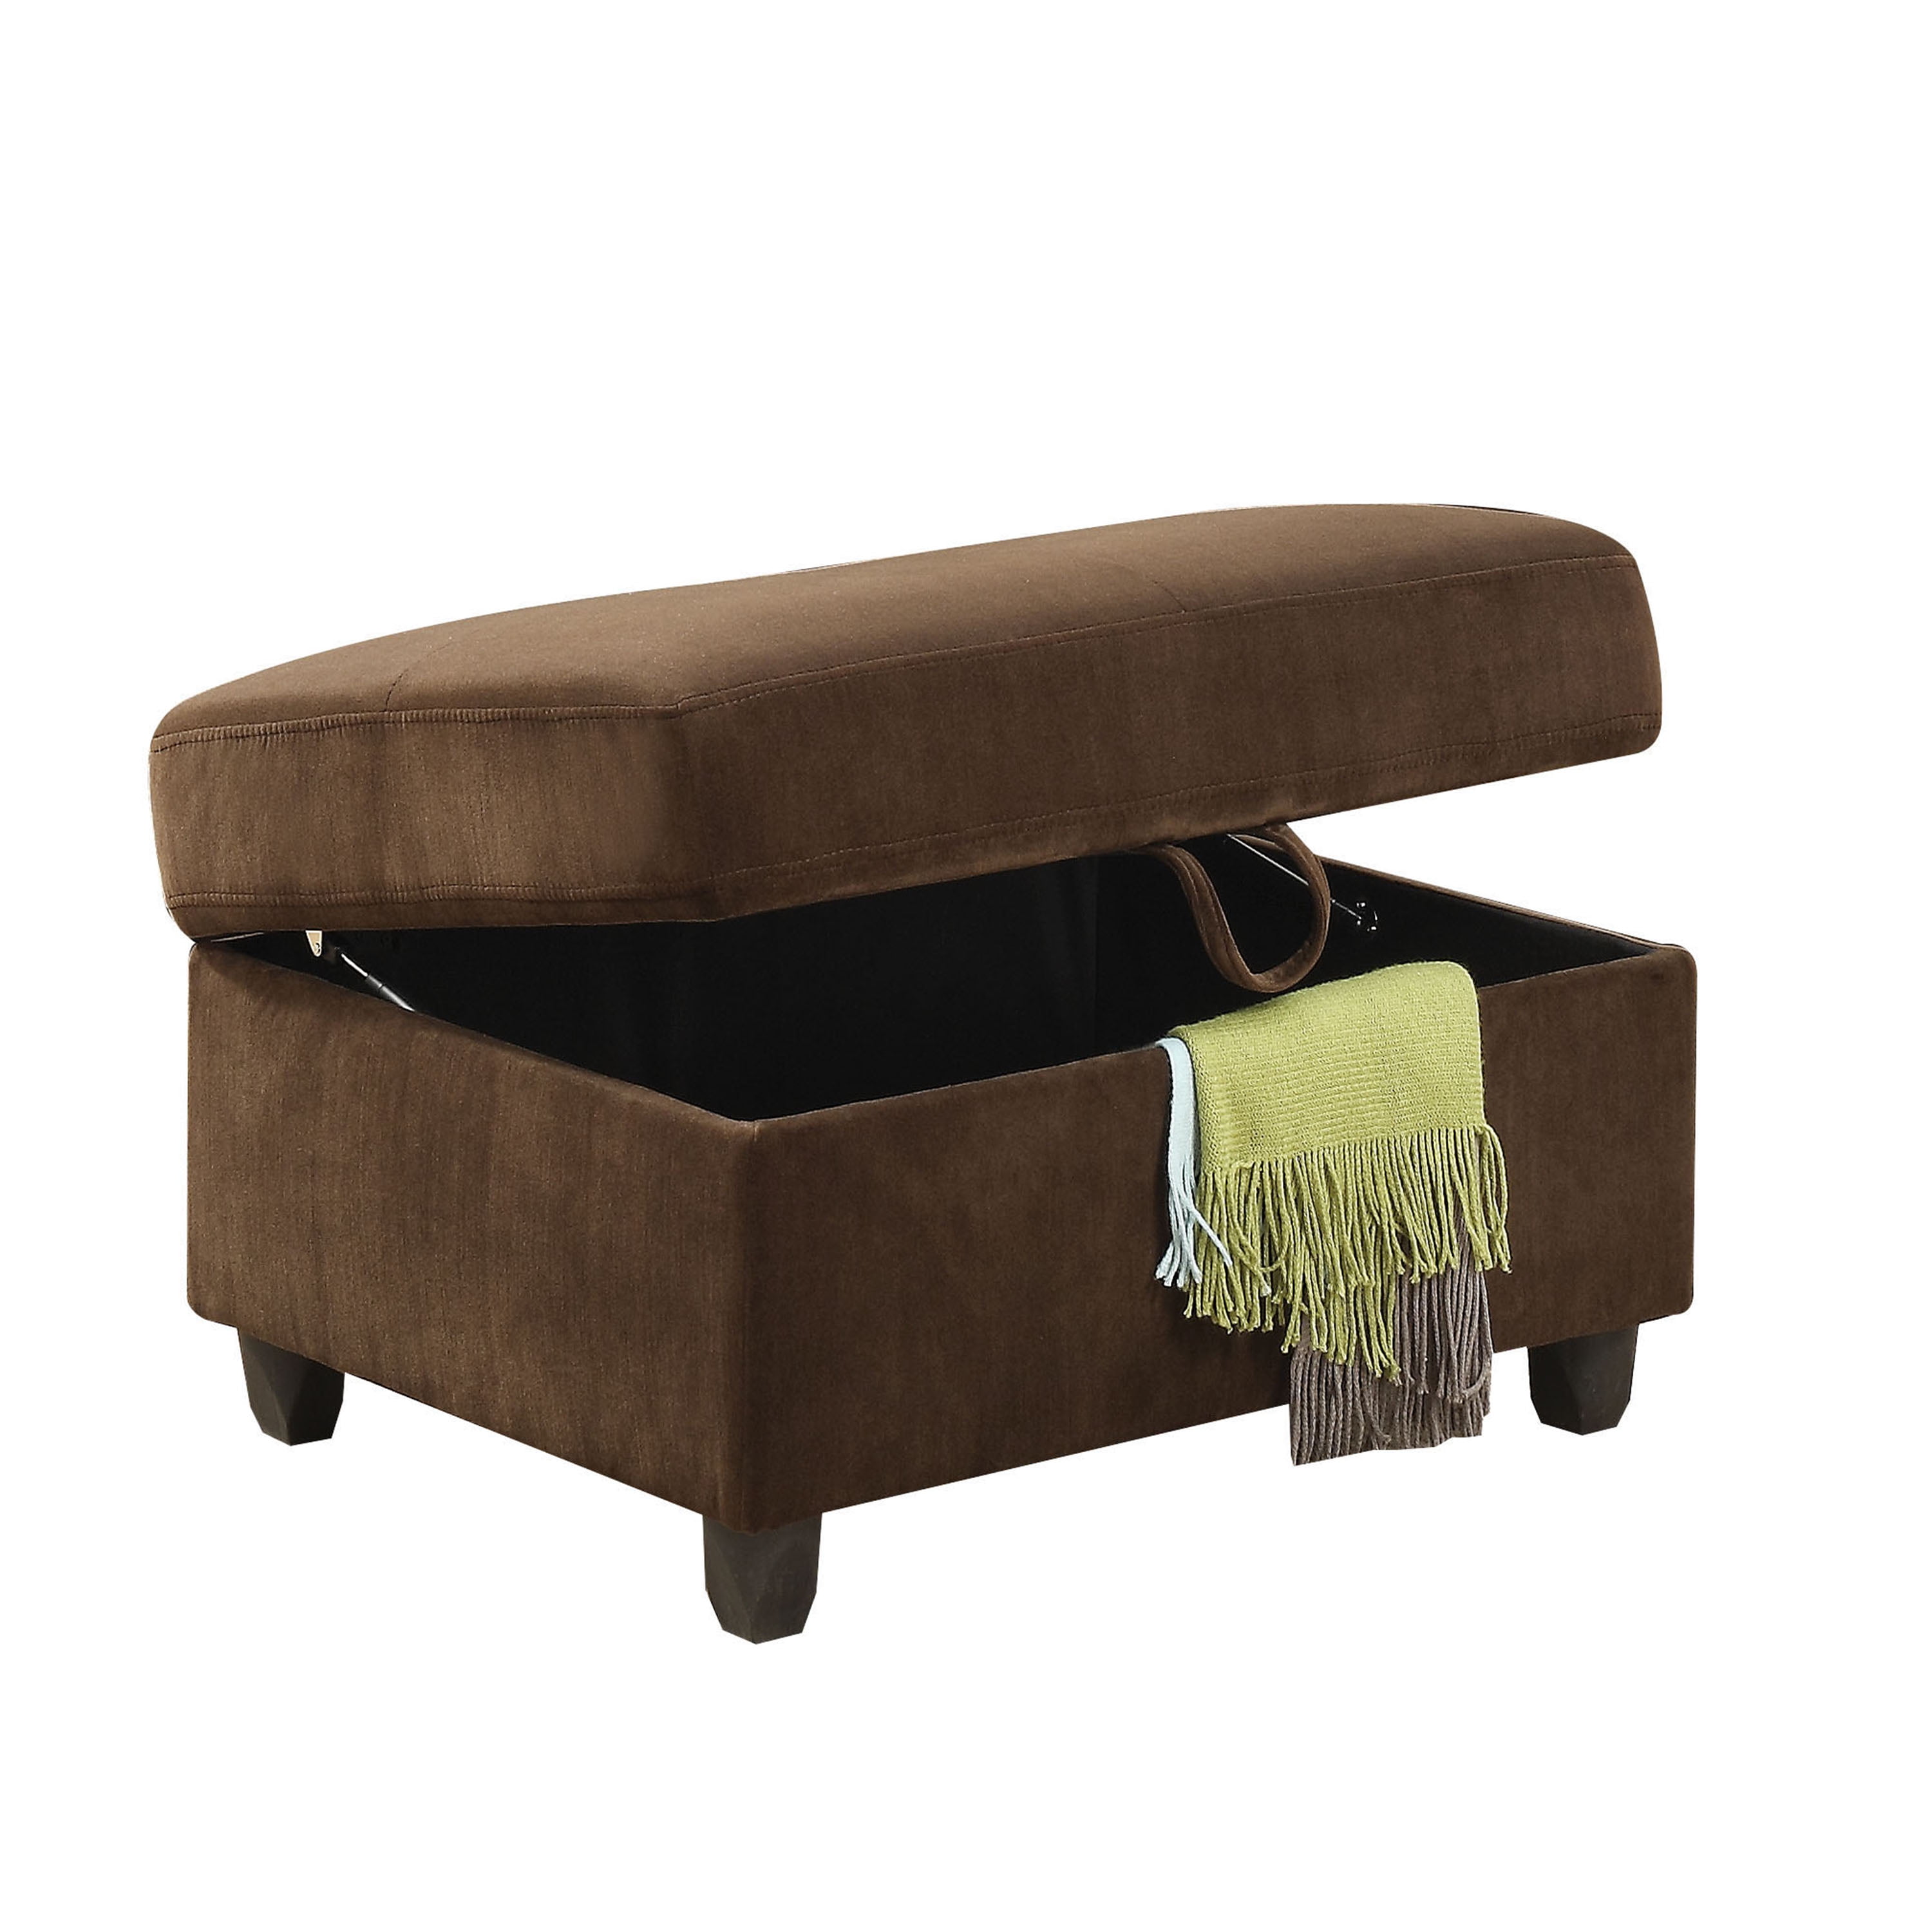 Picture of ACME 52703 Belville Ottoman with Storage - Chocolate Velvet